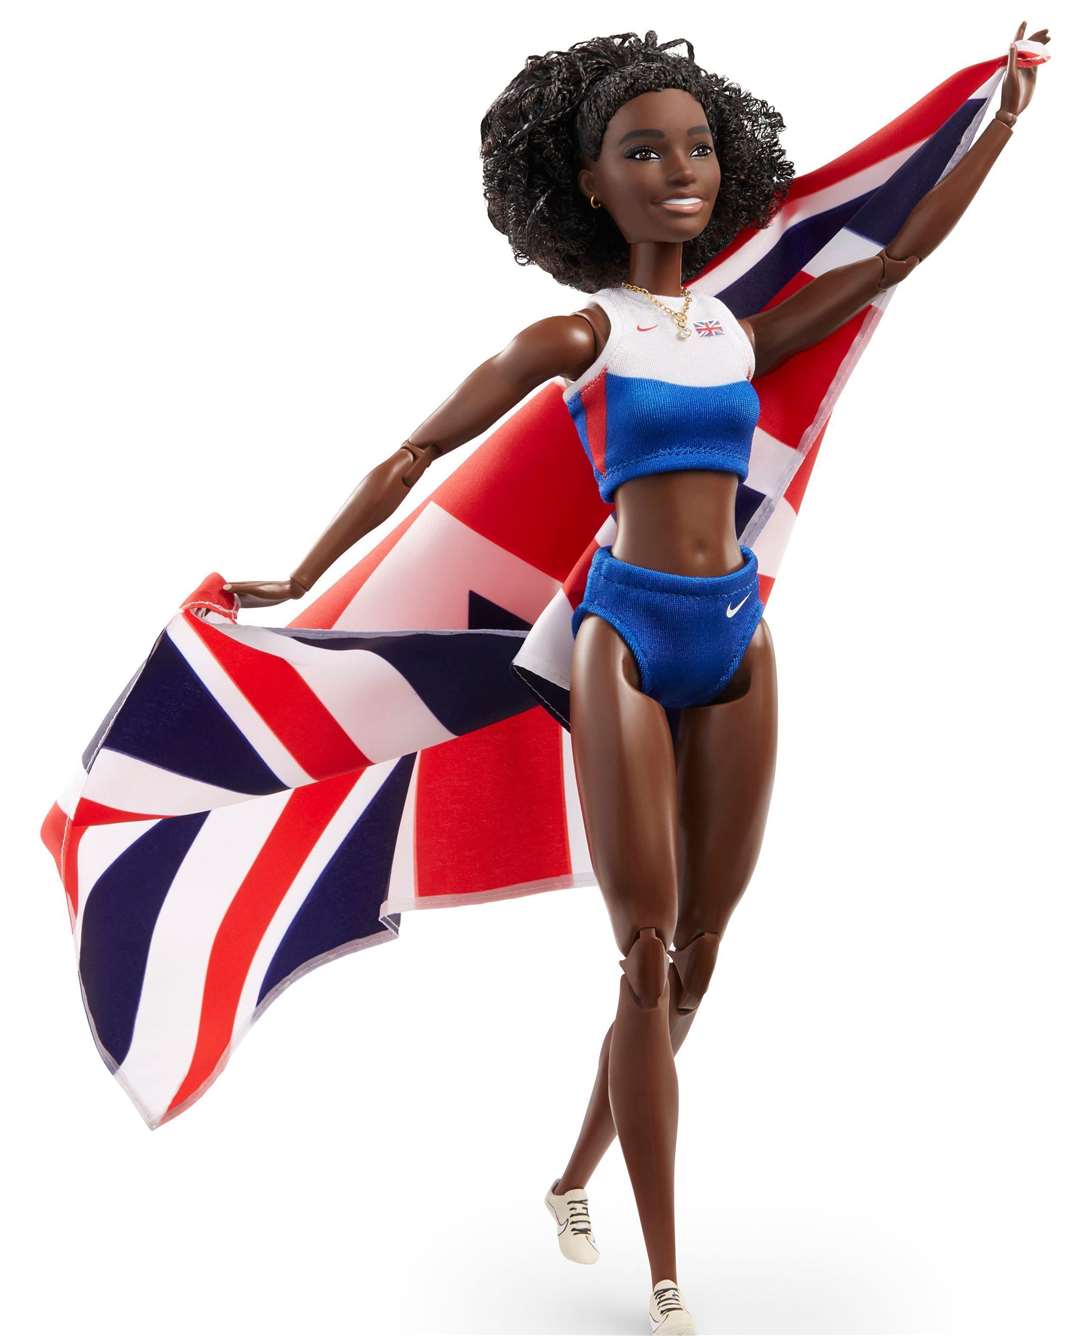 Dina Asher-Smith's Barbie 'Shero' doll Picture: @dinaashersmith